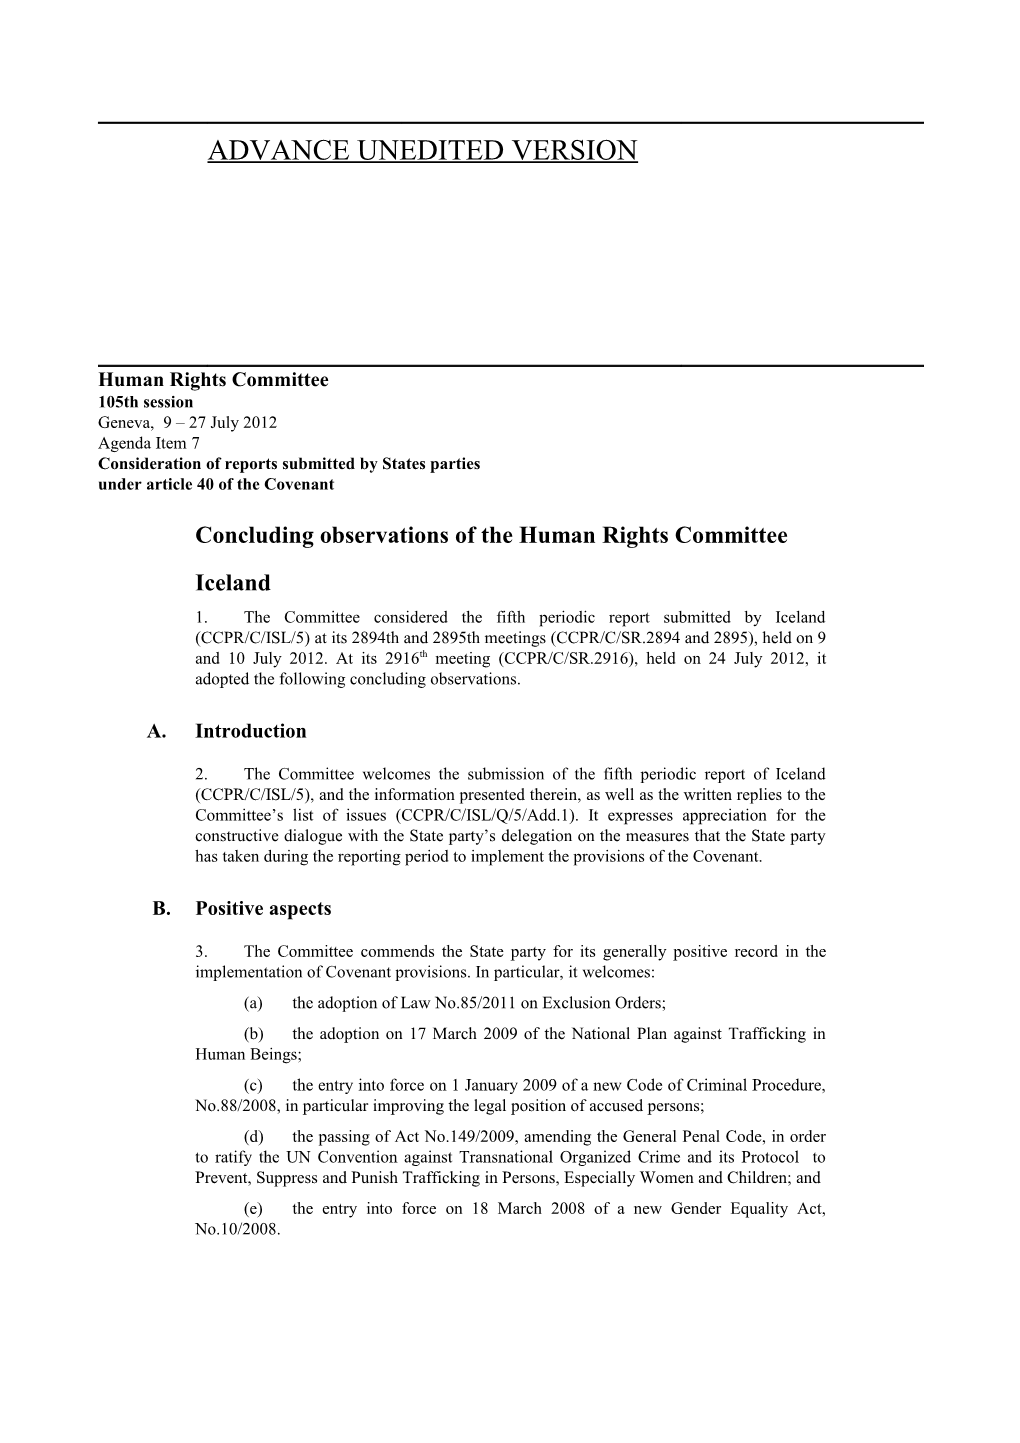 Concluding Observations of the Human Rights Committee